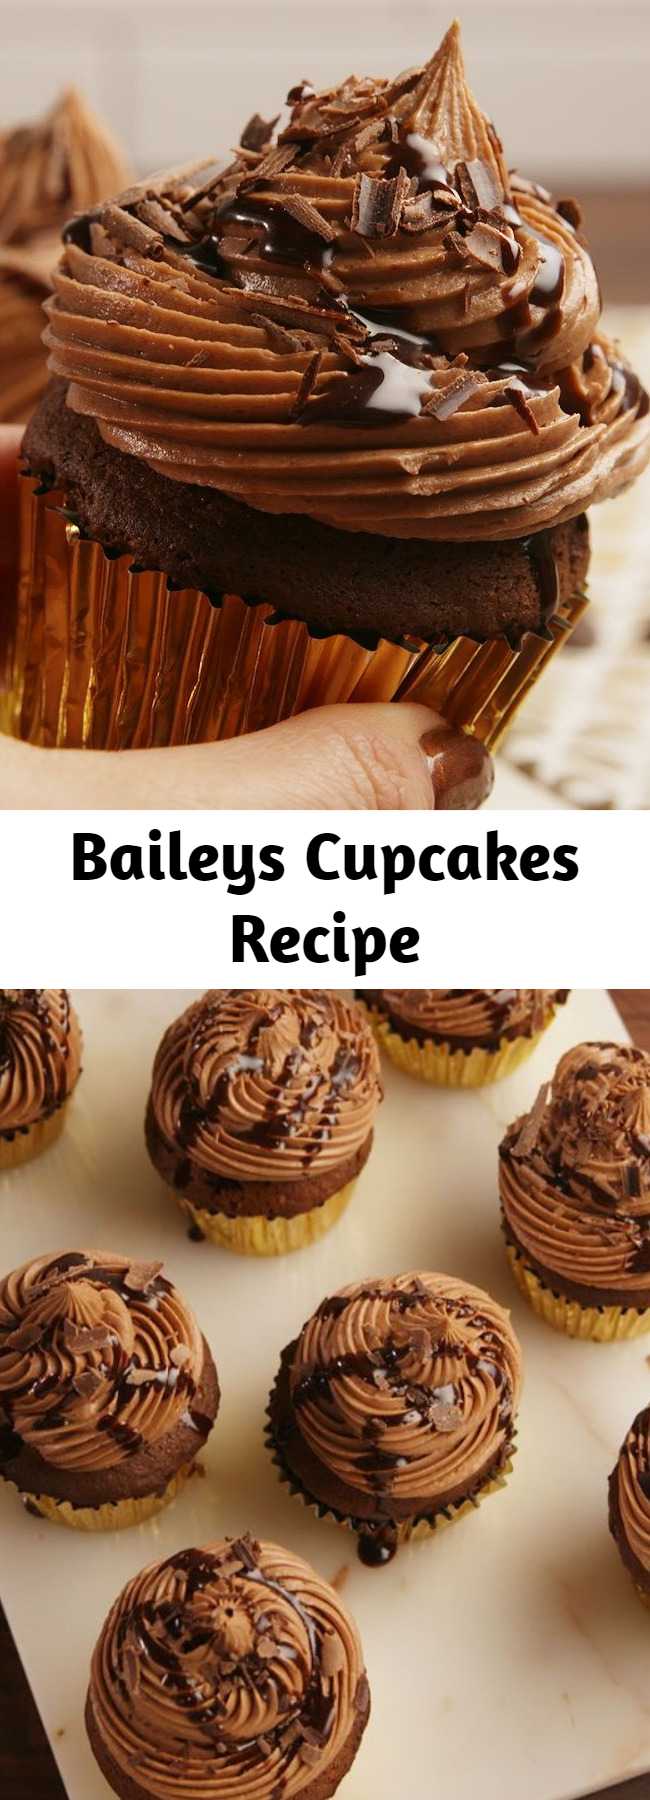 Baileys Cupcakes Recipe - These cupcakes are perfect for Baileys lovers. All cupcakes should be boozy.